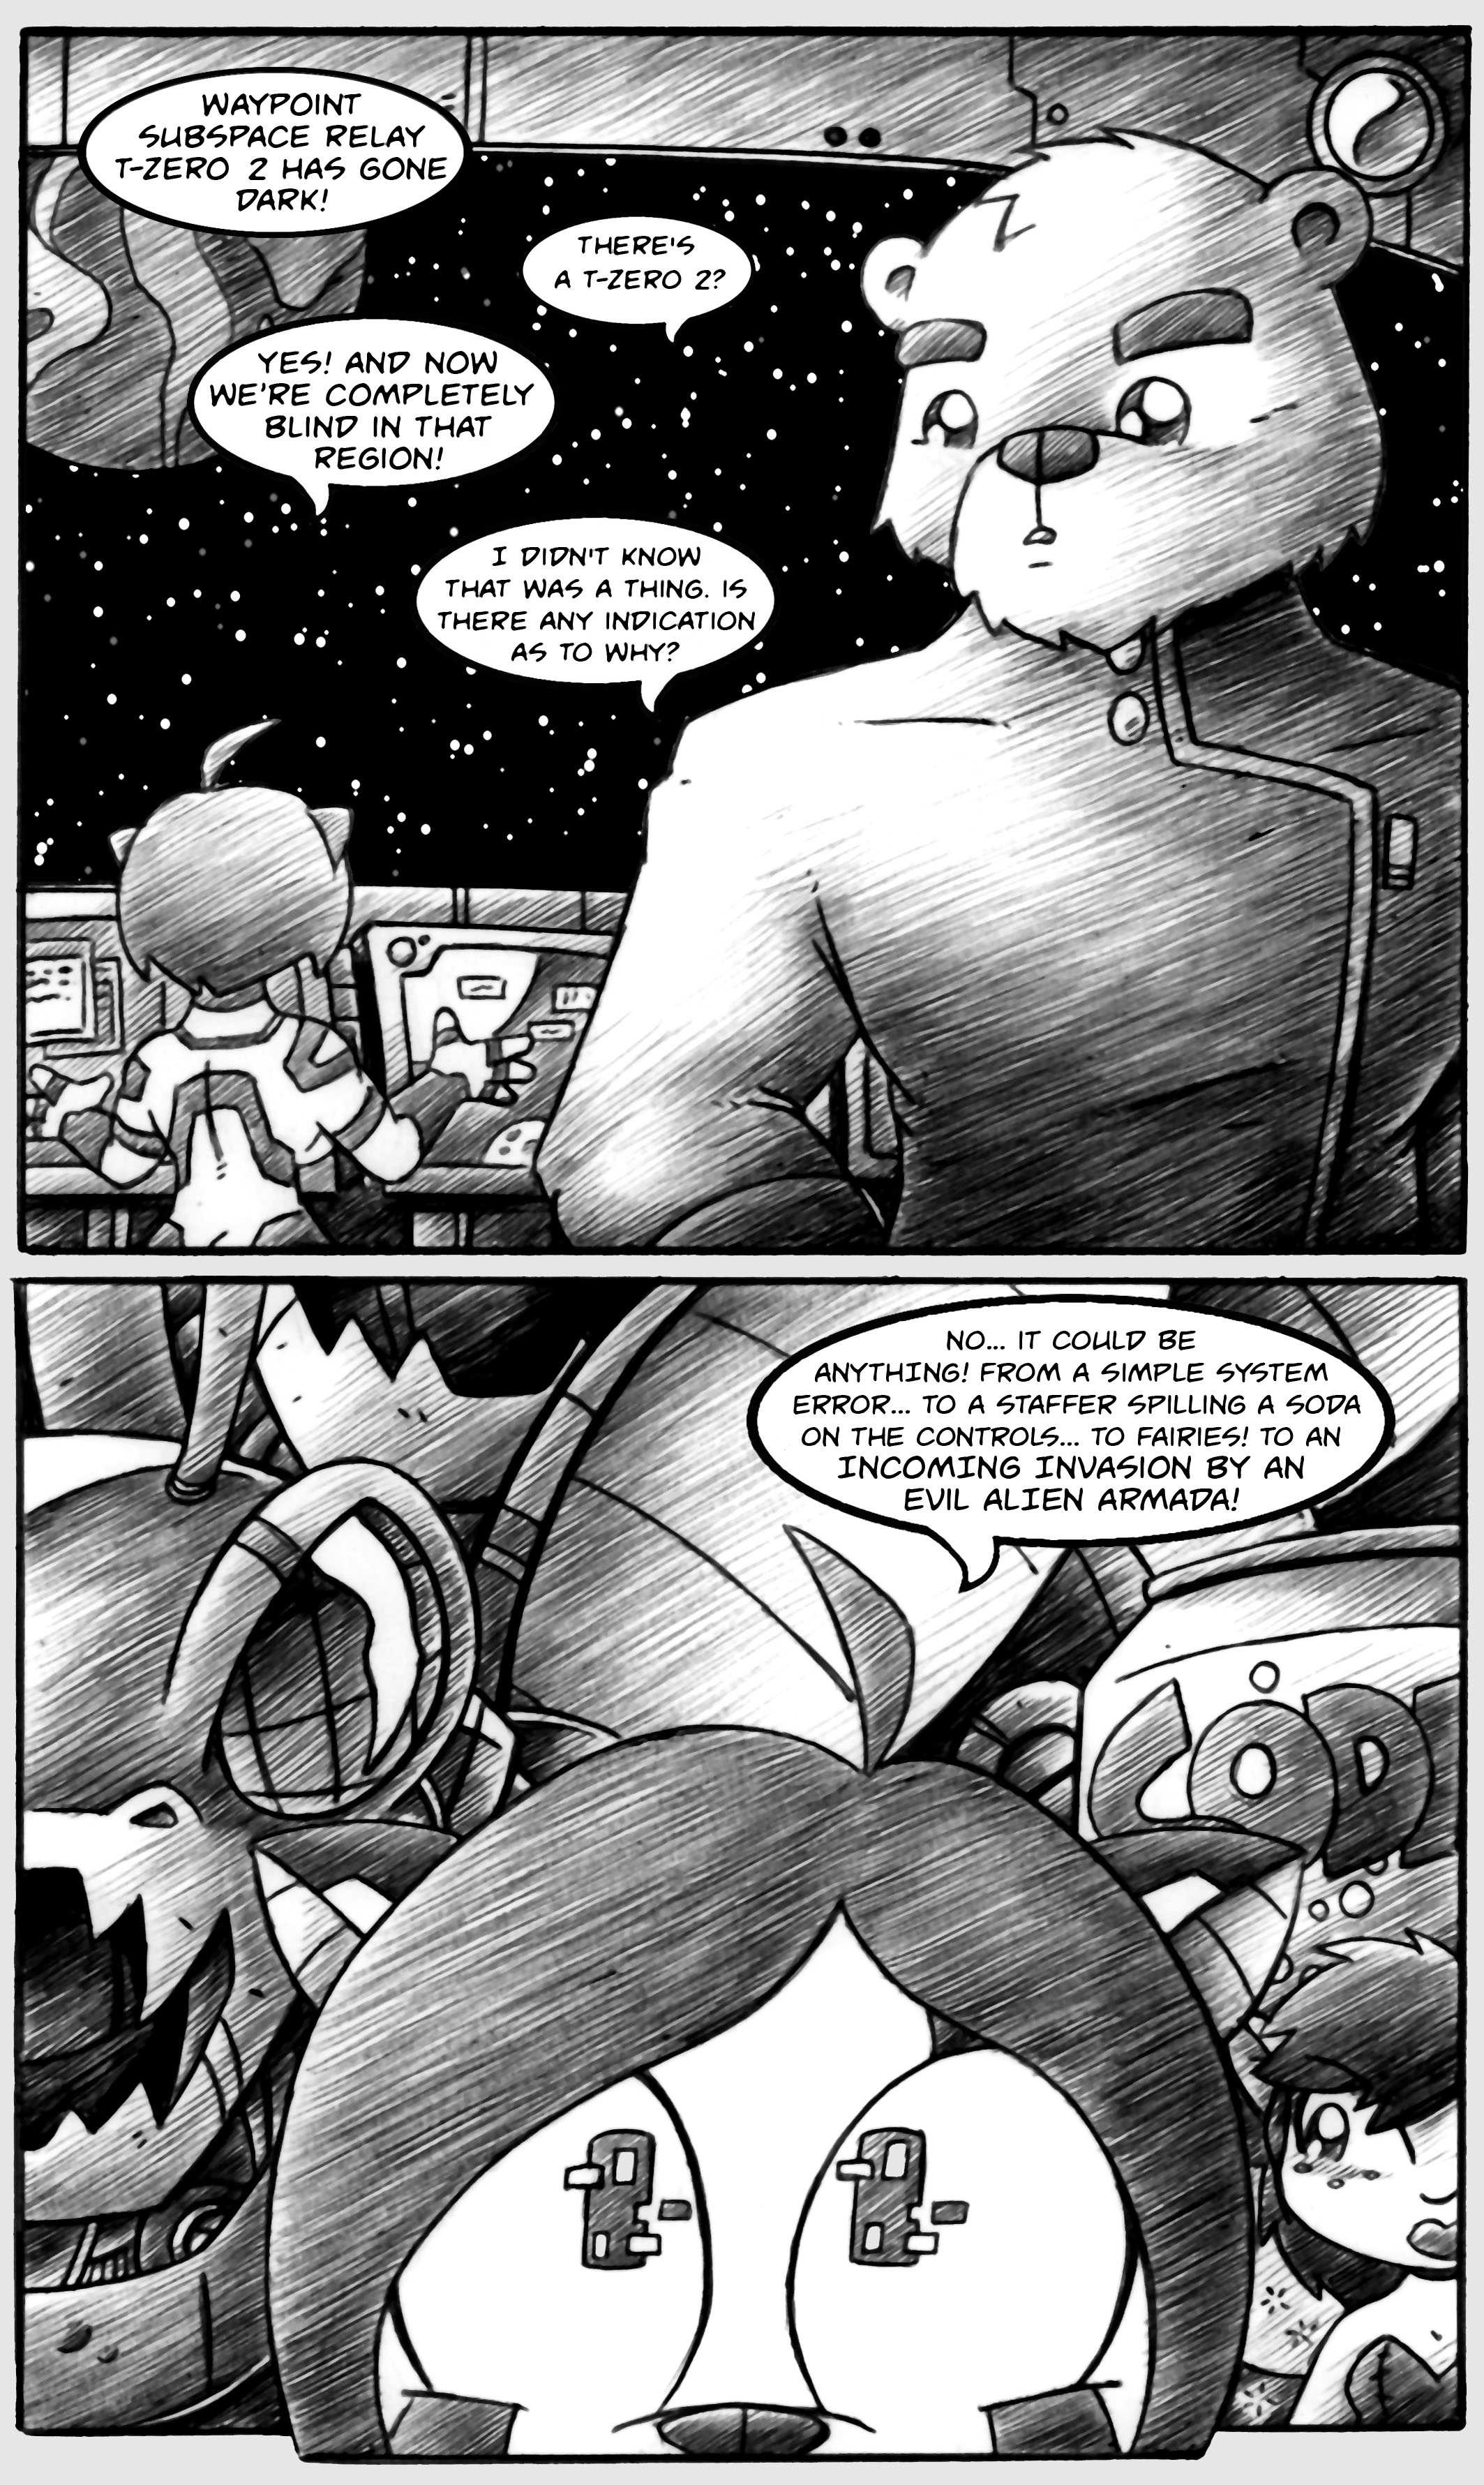 Waypoint: Chapter 1, Page 2